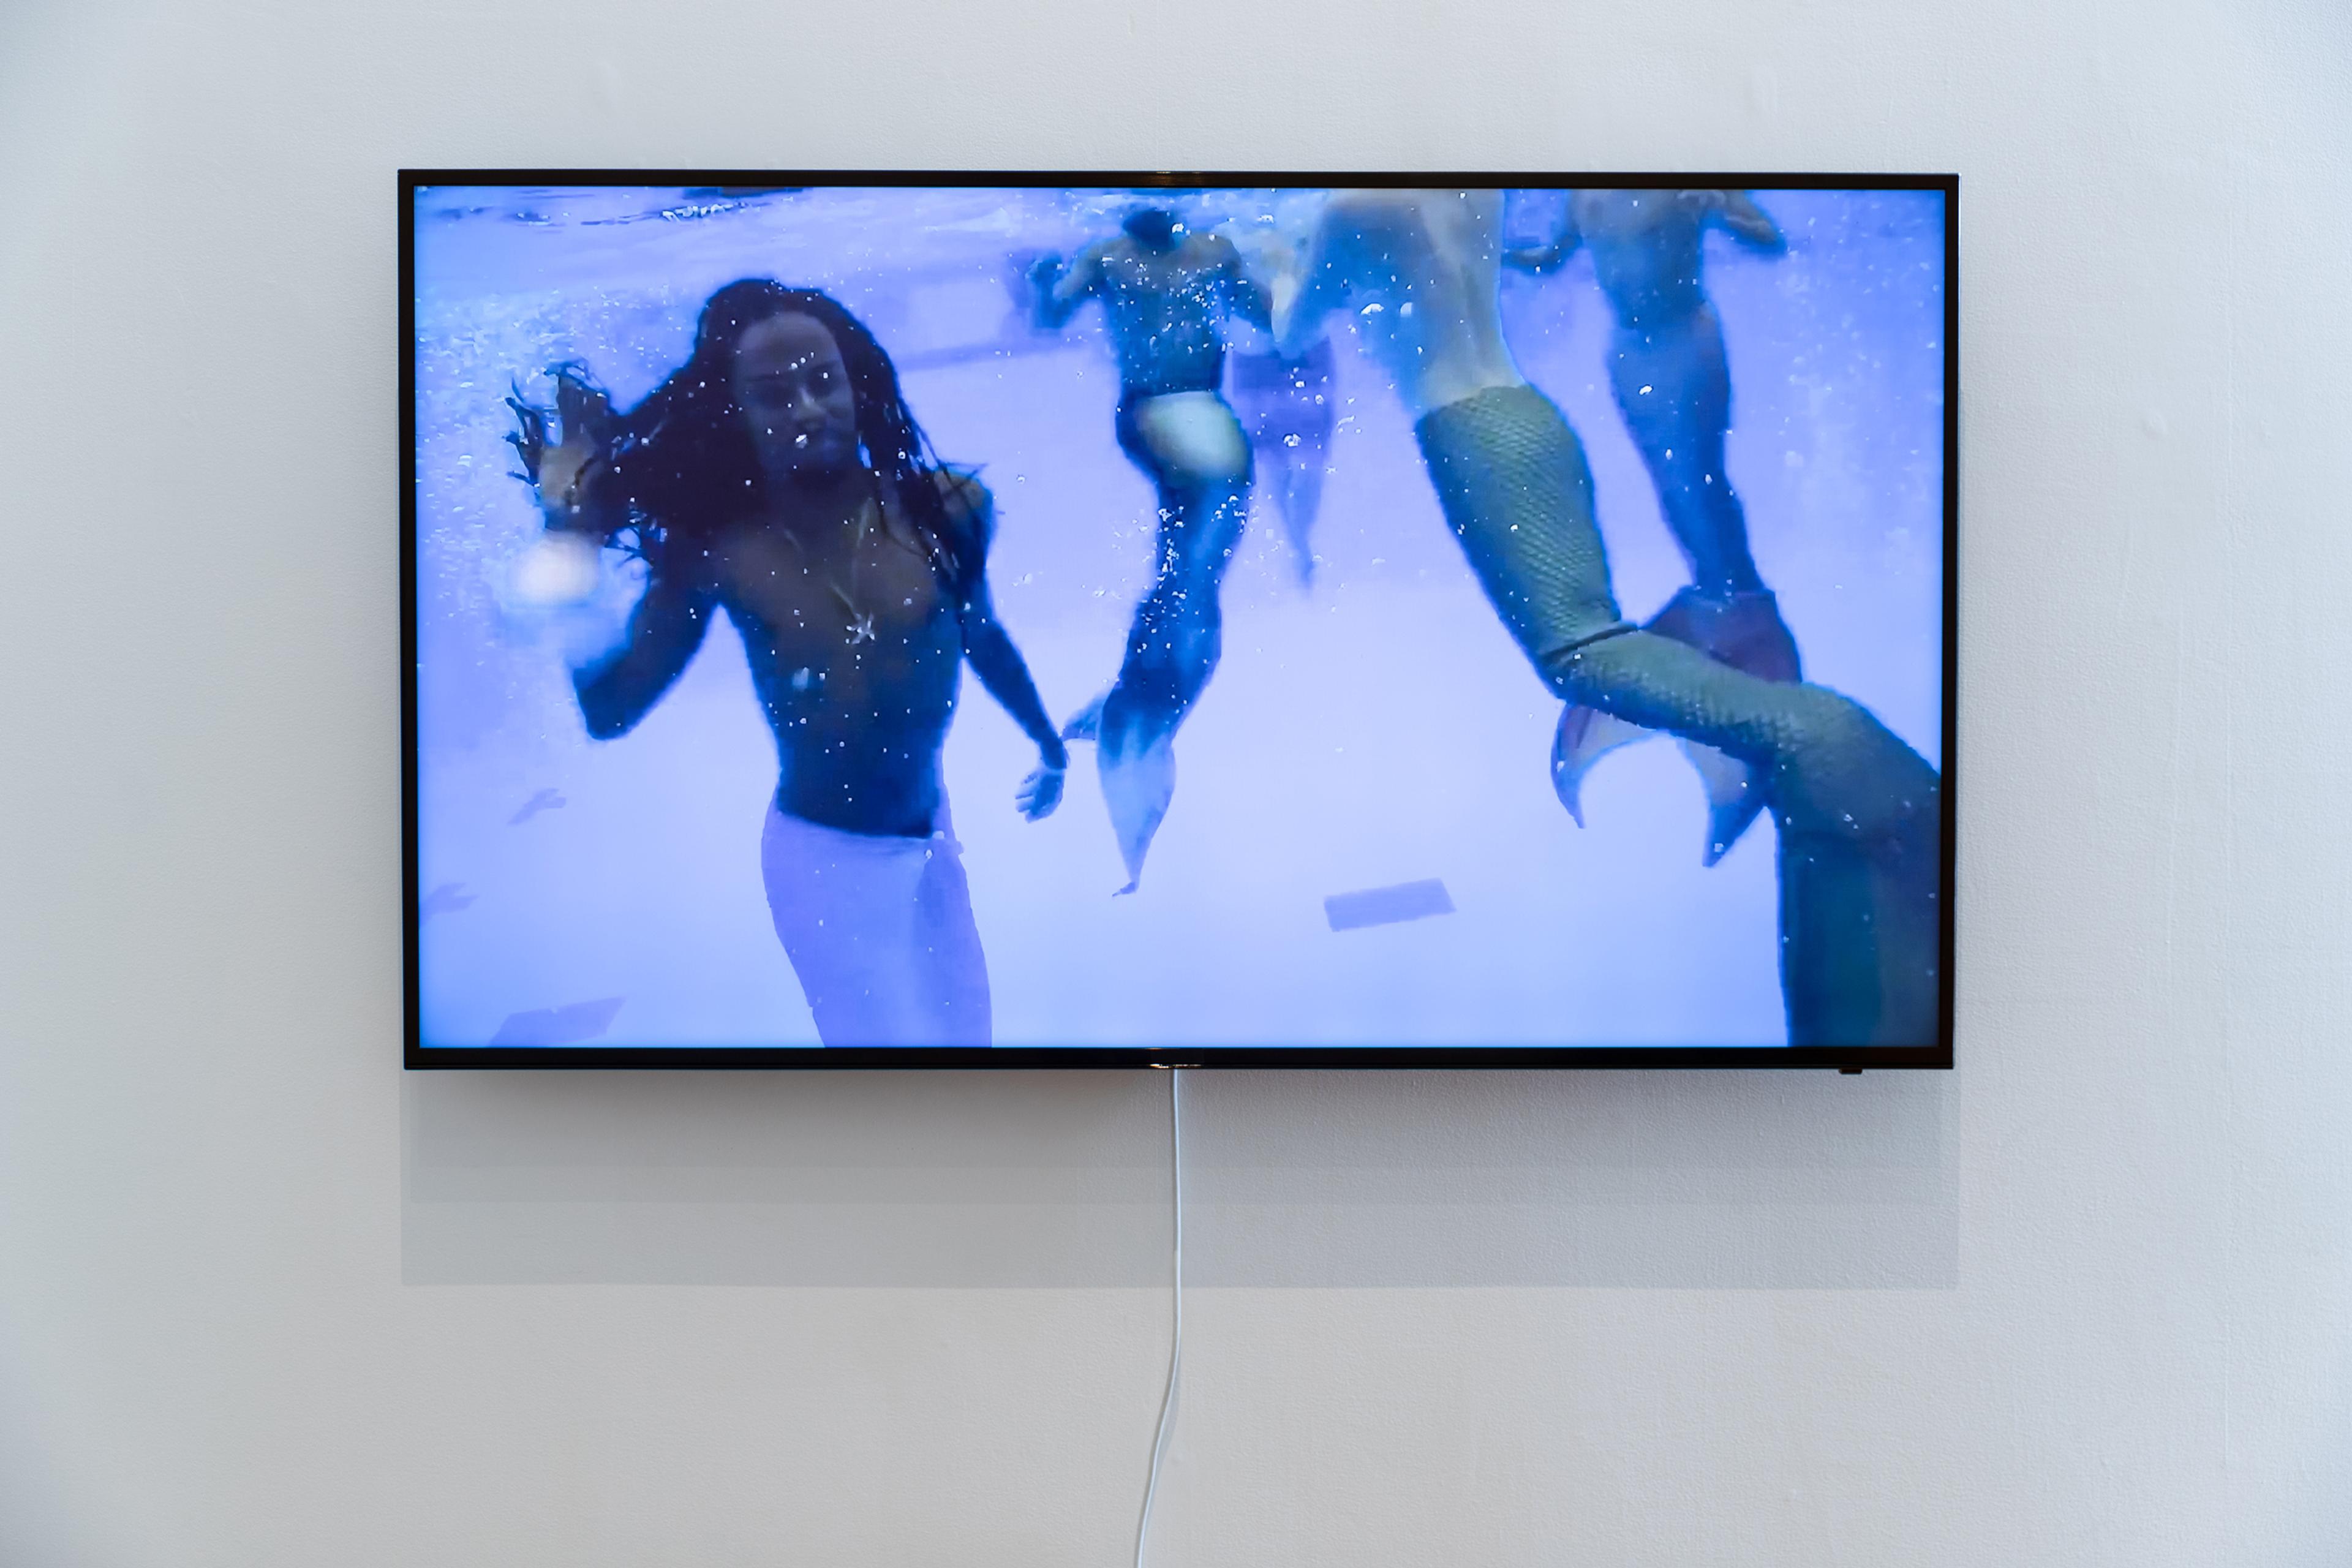 Video still from Suzanne Husky, On the Proliferation of Mermaids in the Time of Shipwrecks, 2017, video, colour, sound, 25 mins 35 secs. Courtesy of the artist and Galerie Alain Gutharc Gallery, Paris. Installation view, Megan Dunn: The Mermaid Chronicles, Te Pātaka Toi Adam Art Gallery, Te Herenga Waka Victoria University of Wellington, 2022. Photo: Ted Whitaker